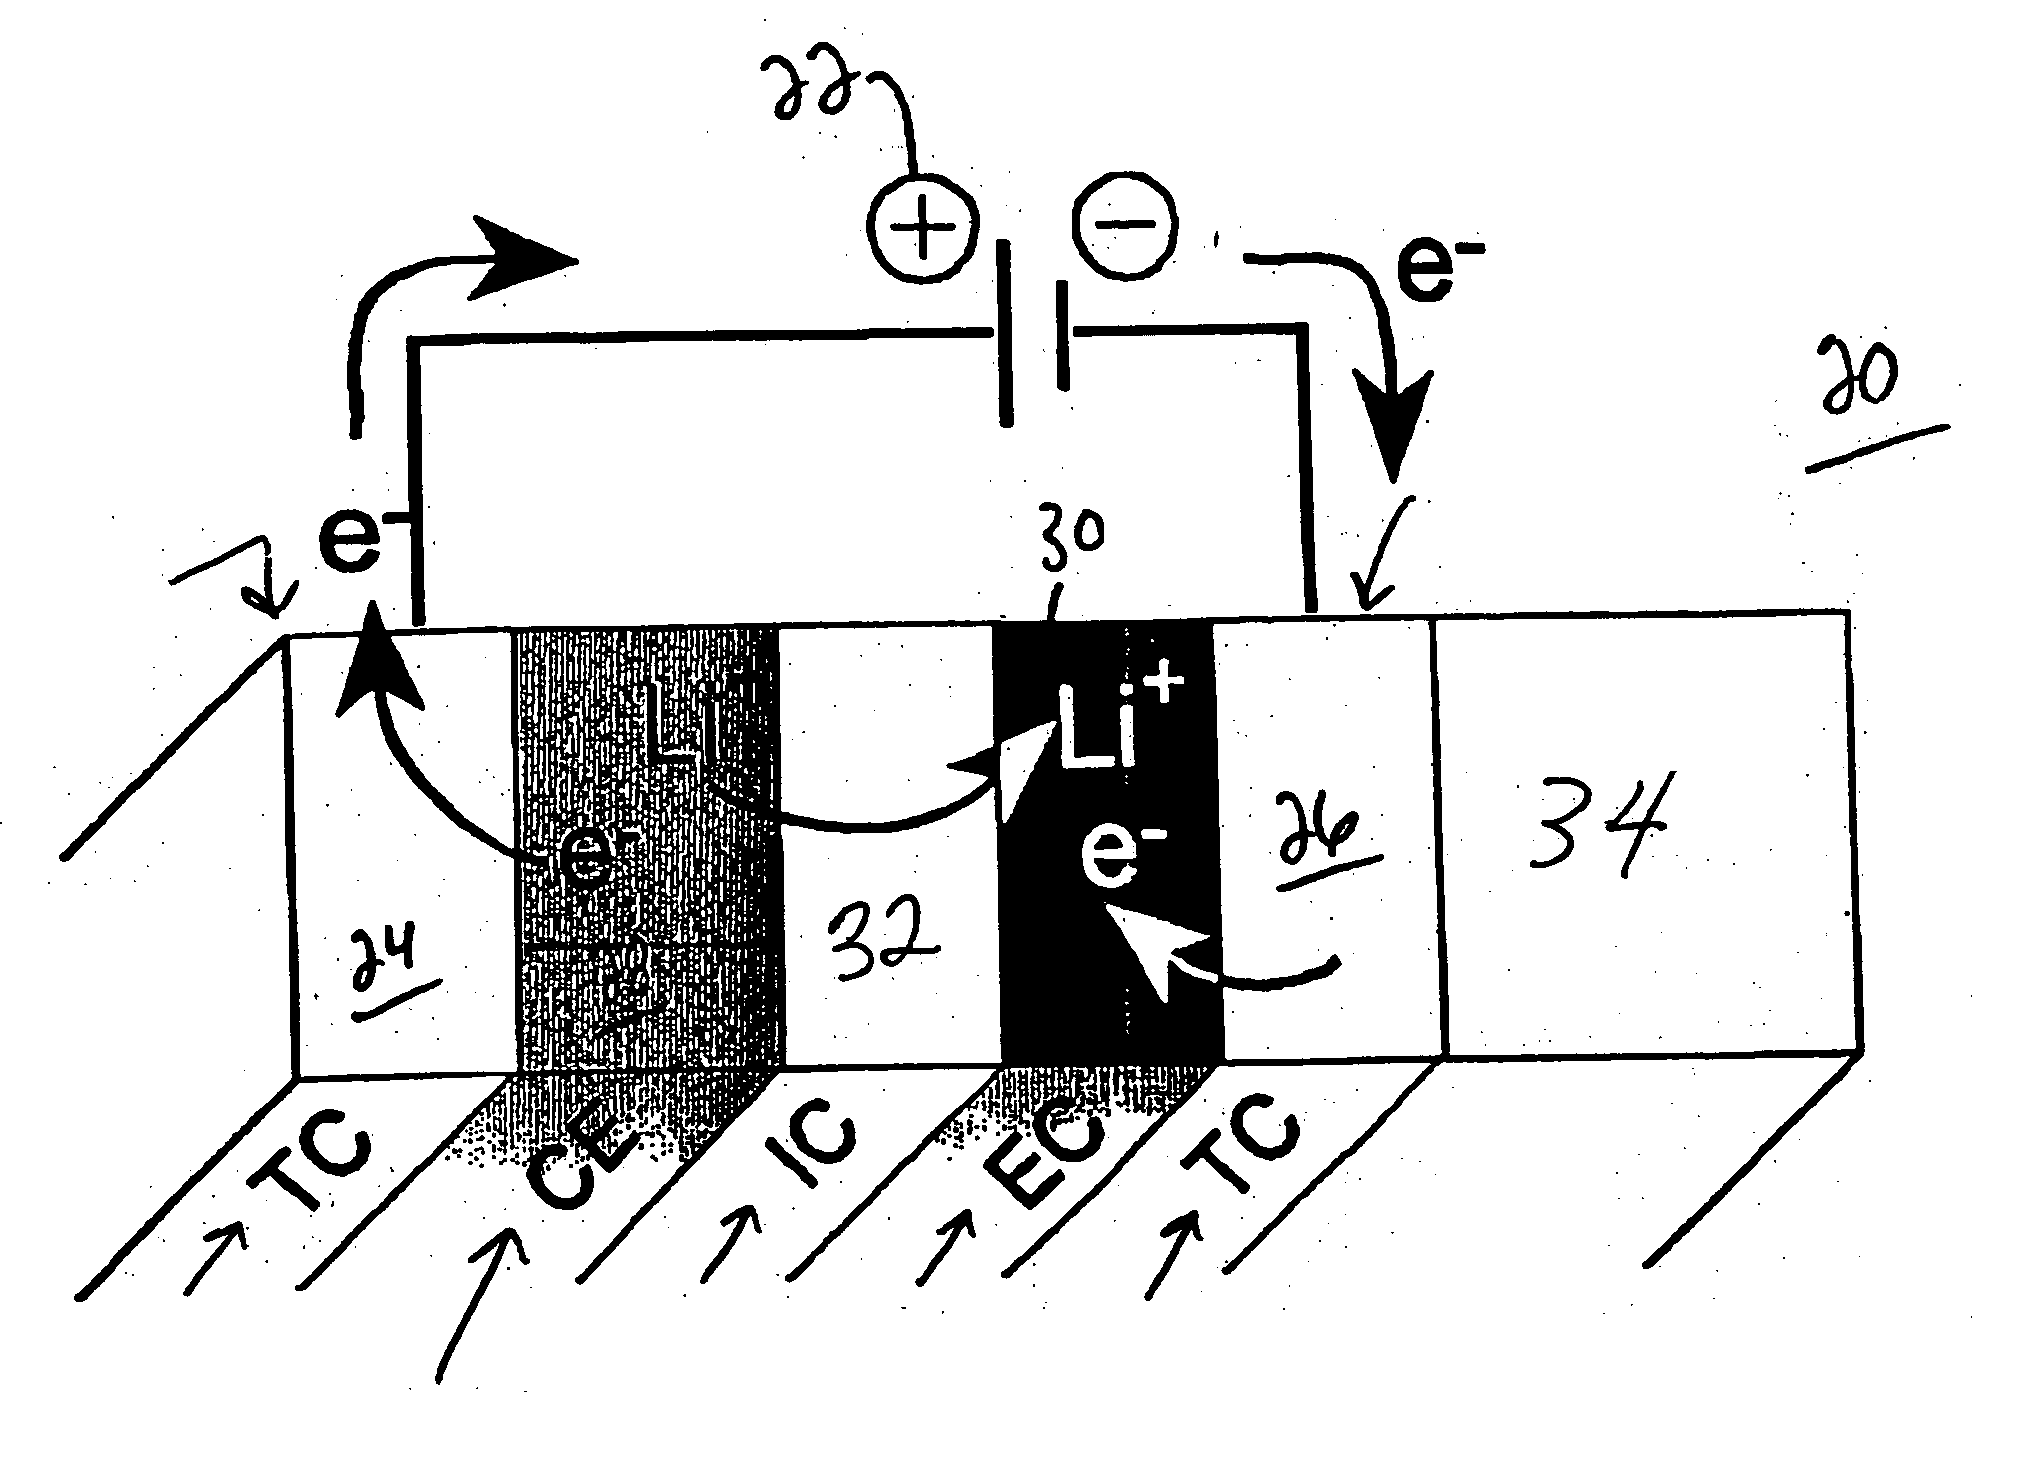 Electrochromic devices and methods